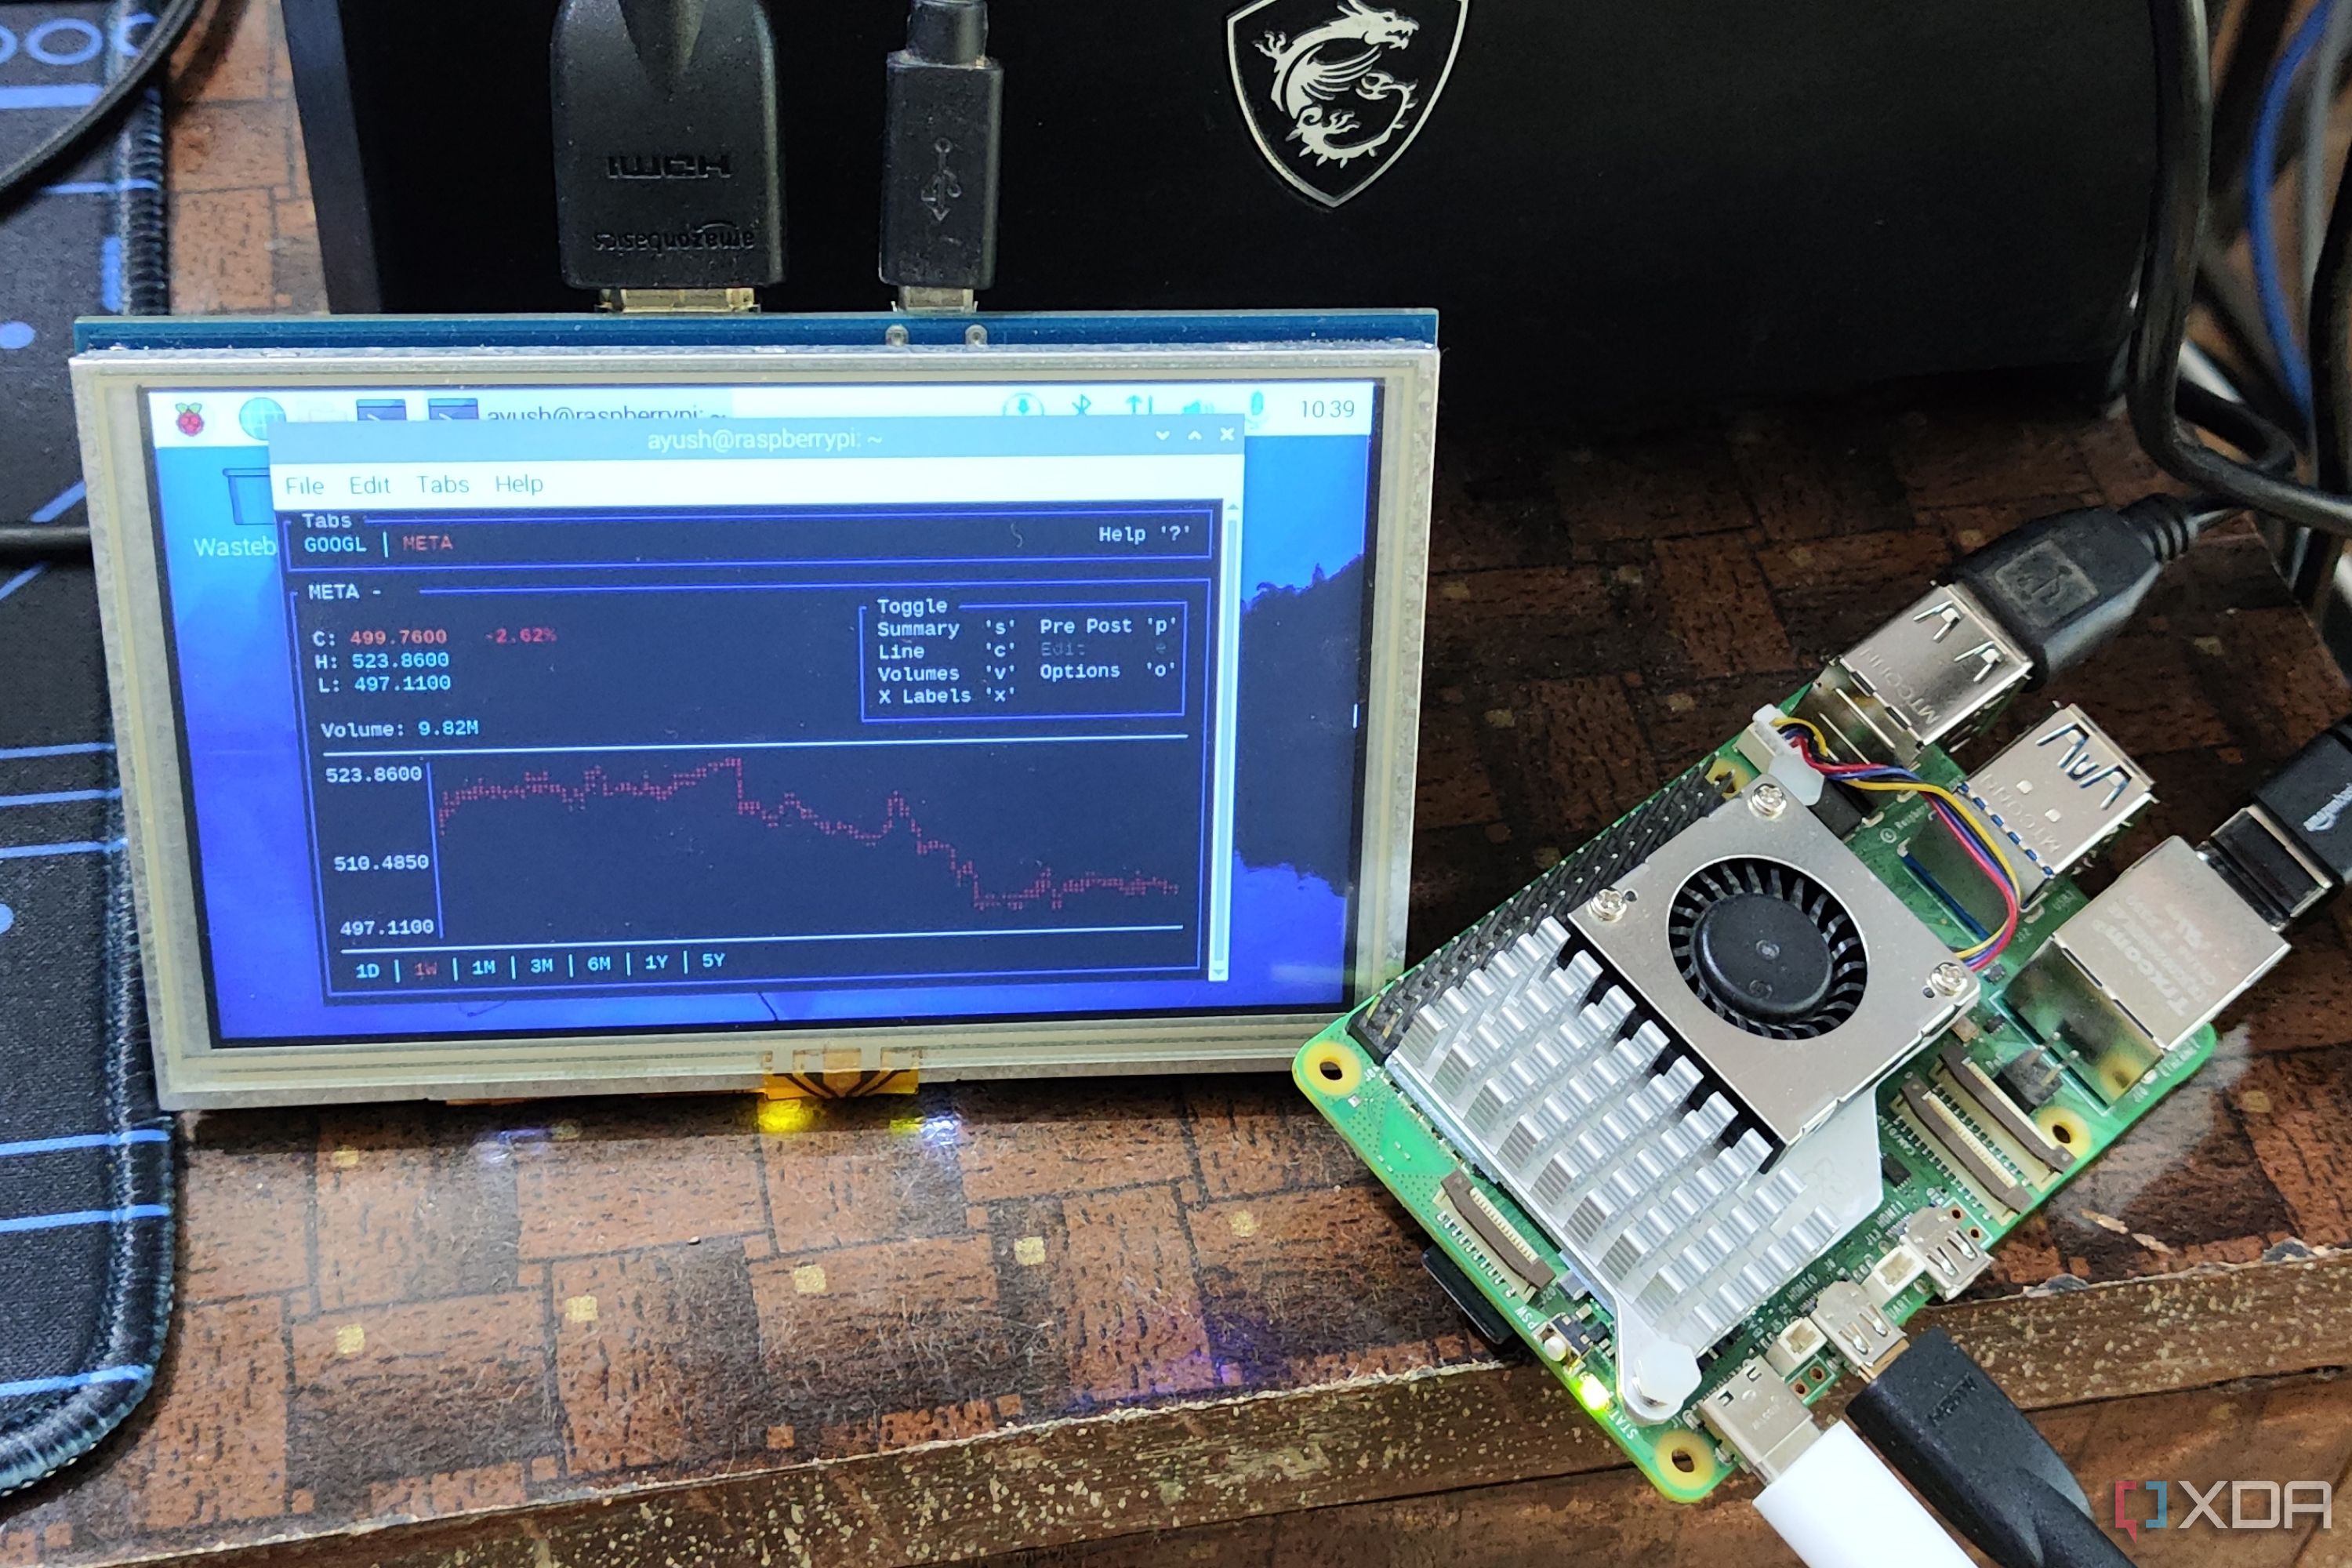 A Raspberry Pi 5 placed next to a portable screen running Tickrs 